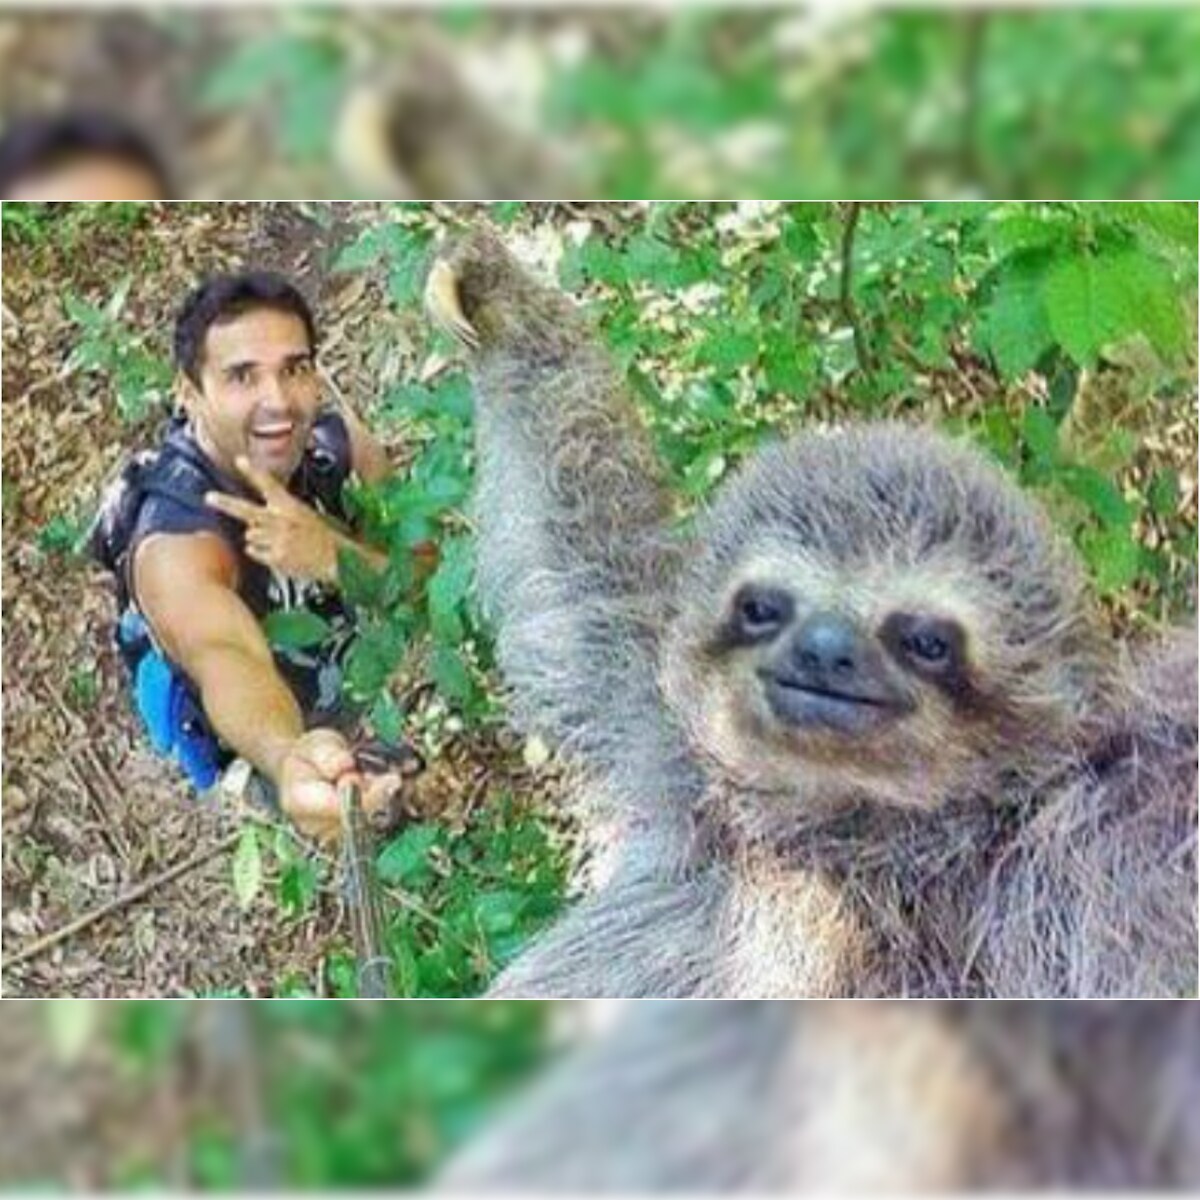 This Man Clicked A Selfie With A Smiling Sloth And It's Breaking The  Internet